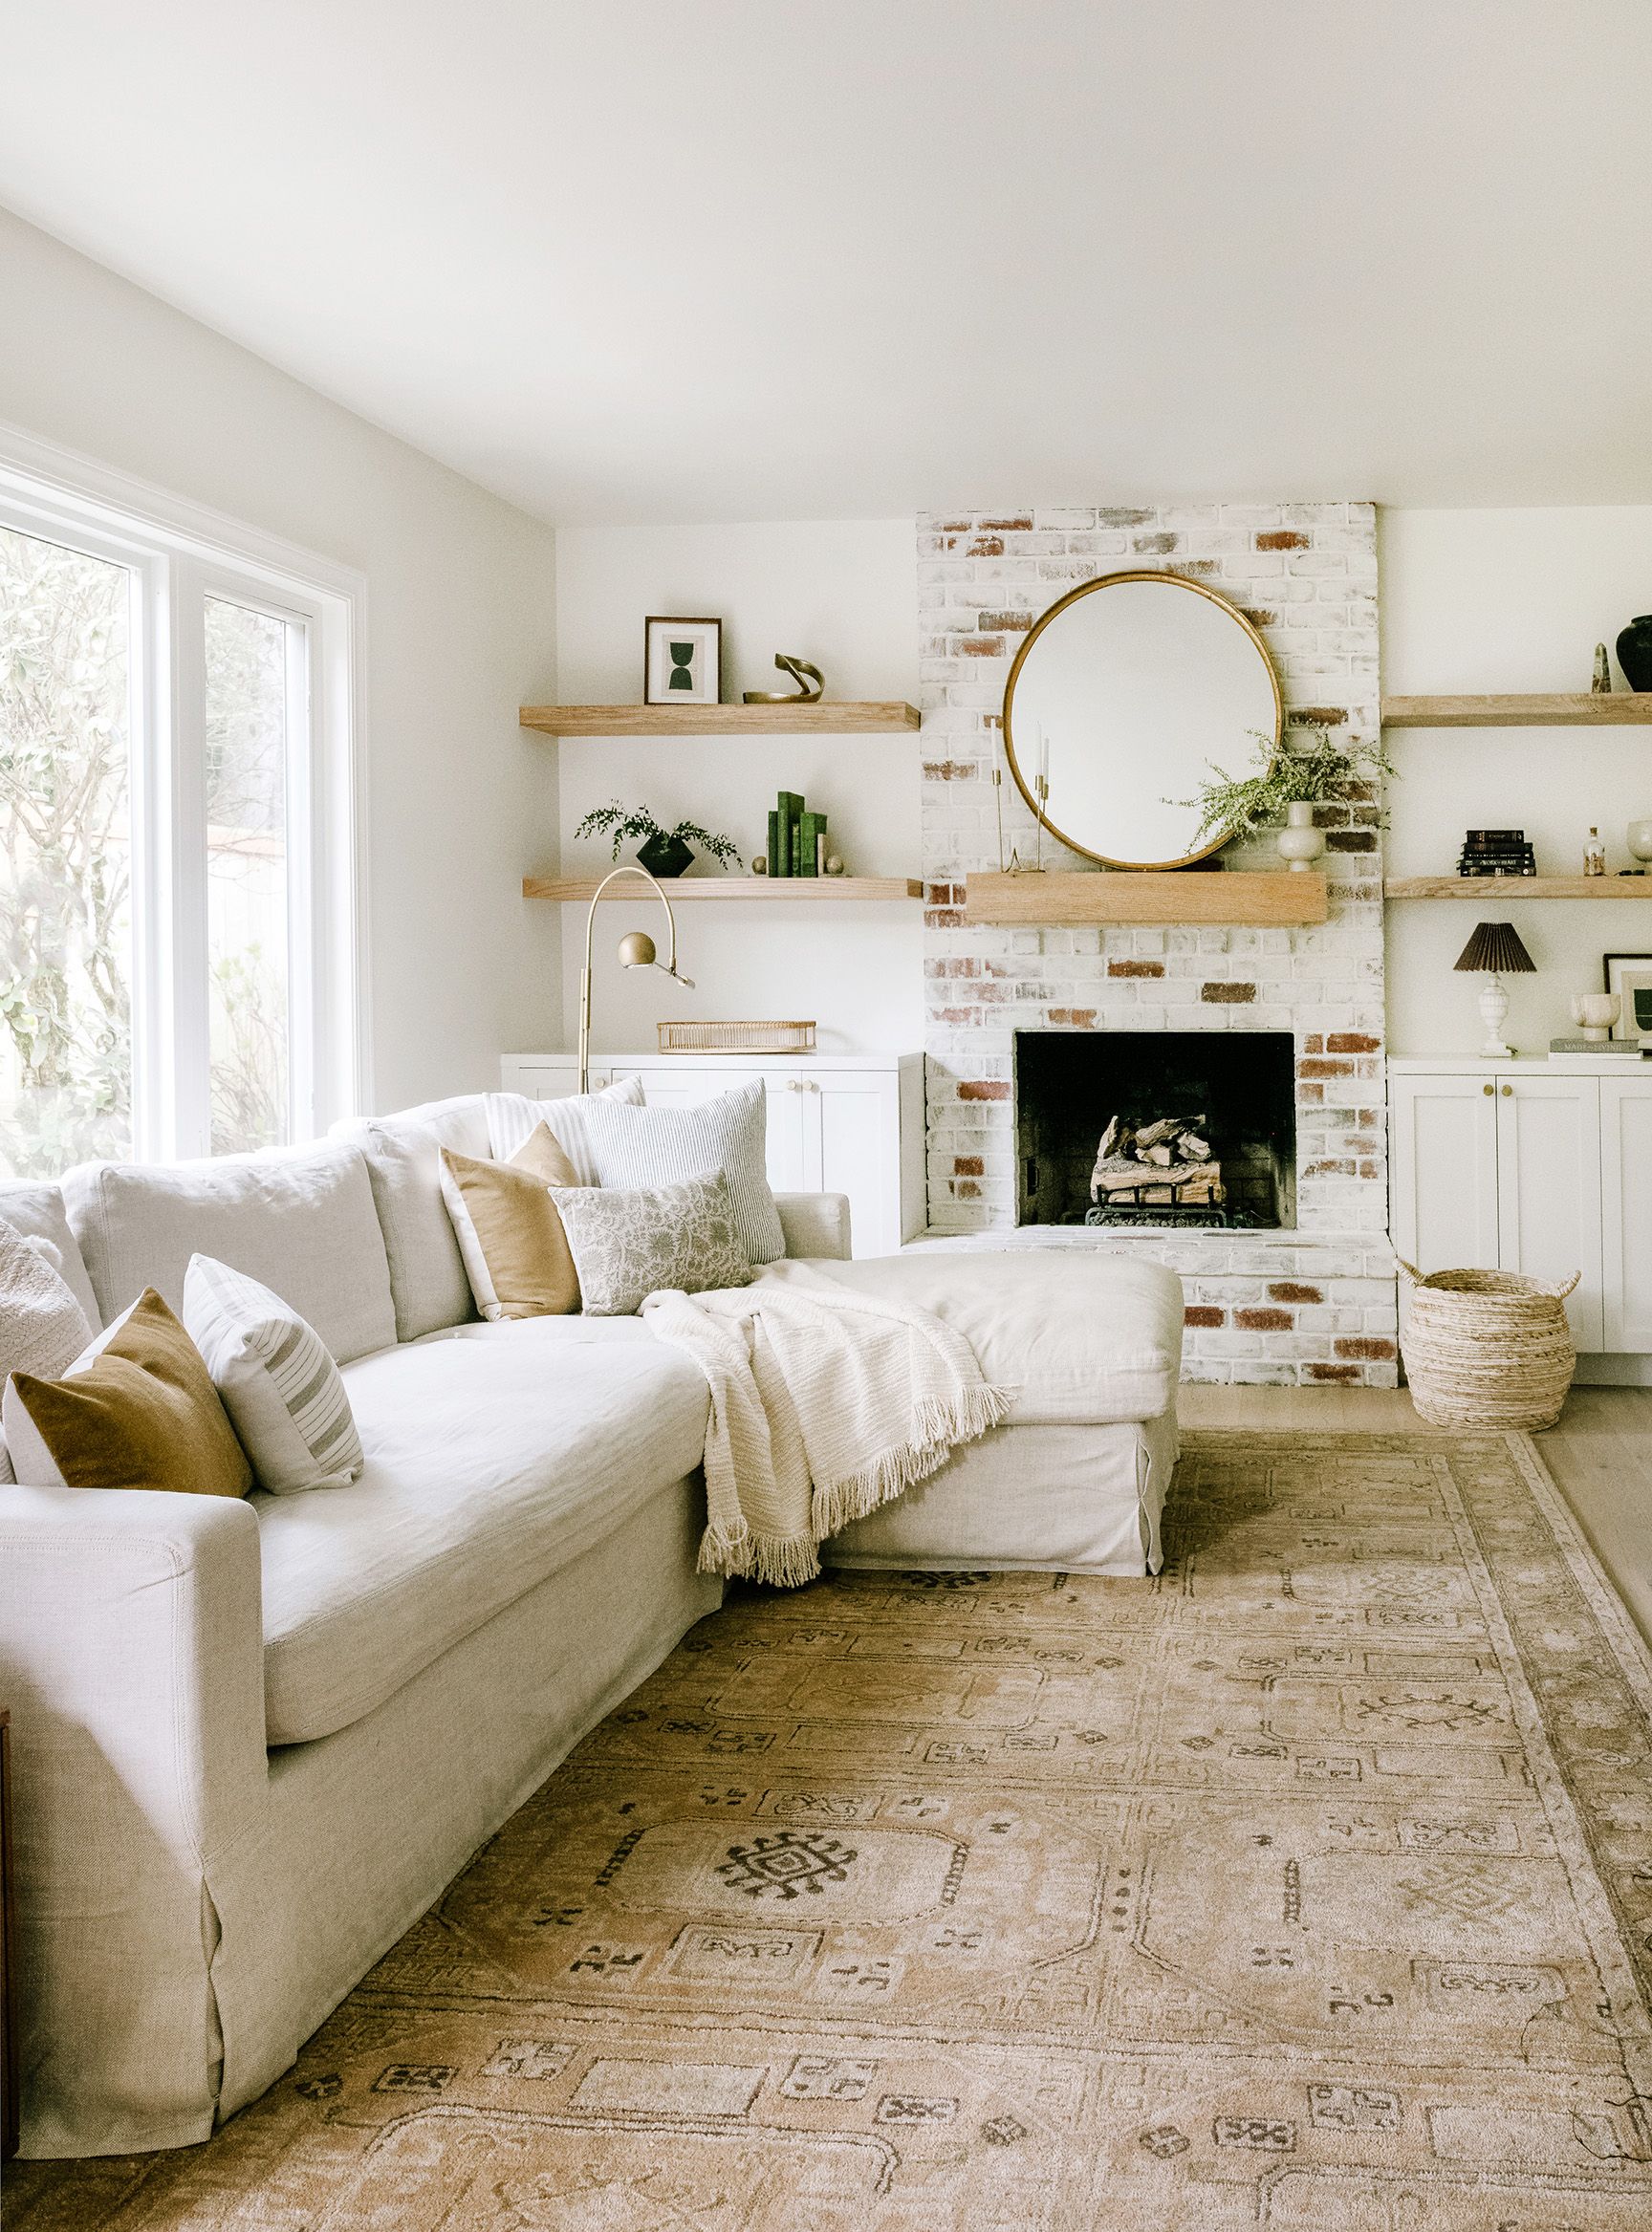 77 Living Room Decor Ideas to Up Your Styling Game